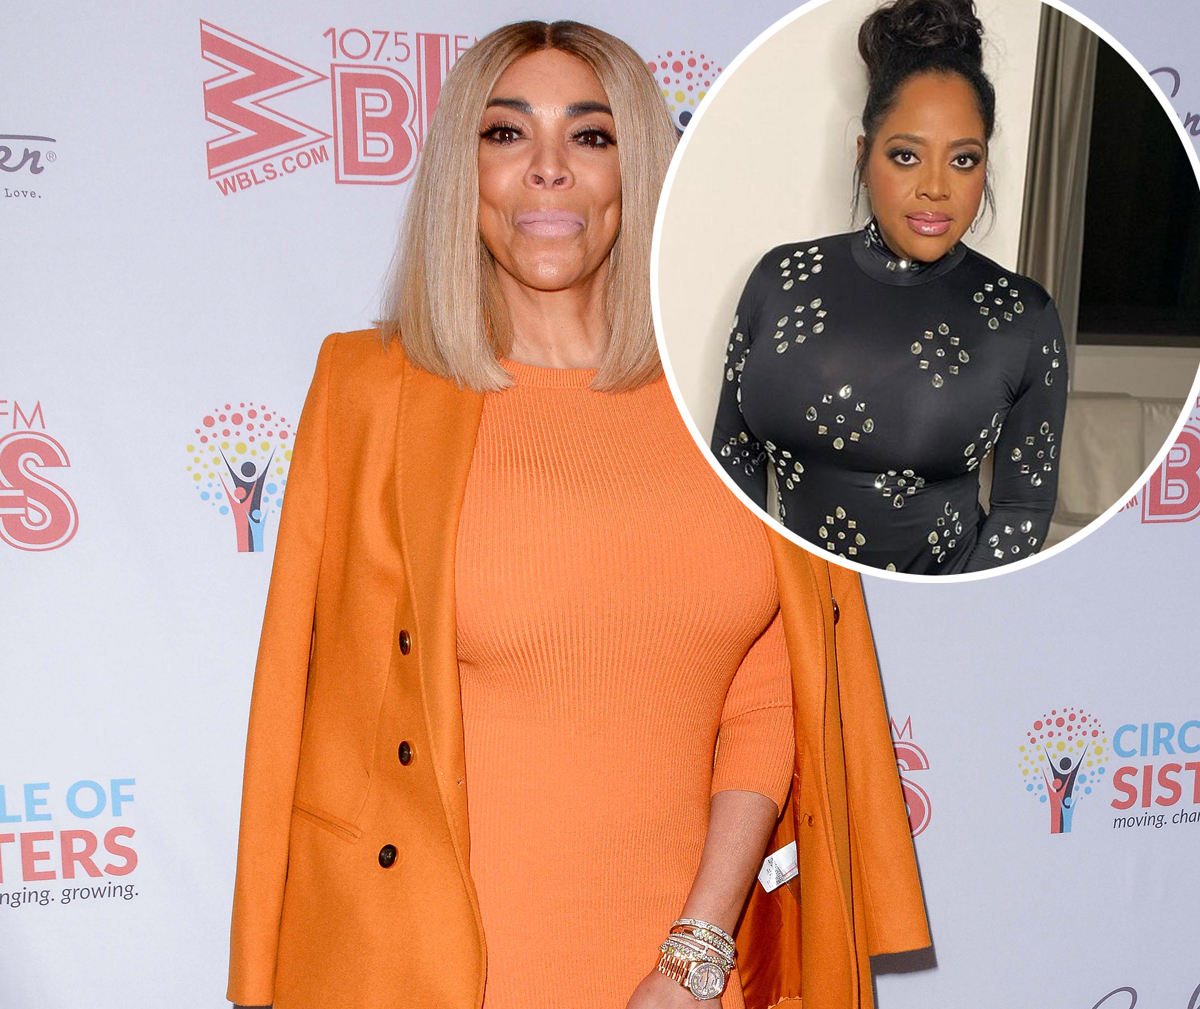 #Wendy Williams’ Friends Are ‘Concerned’ For Her Well-Being After Sherri Shepherd Show Announcement